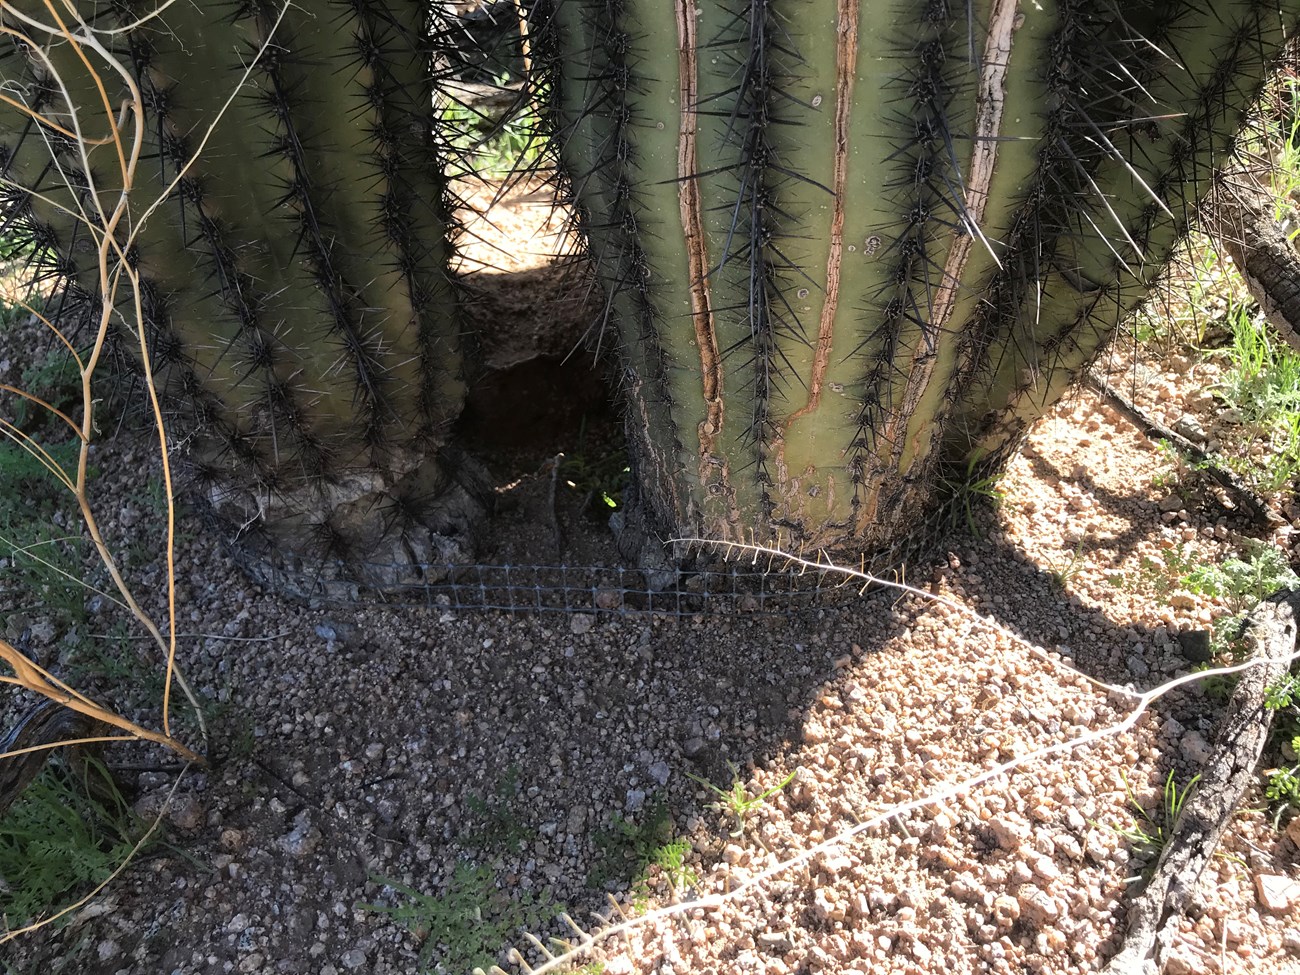 Saguaro base surrounded by a wire mesh.